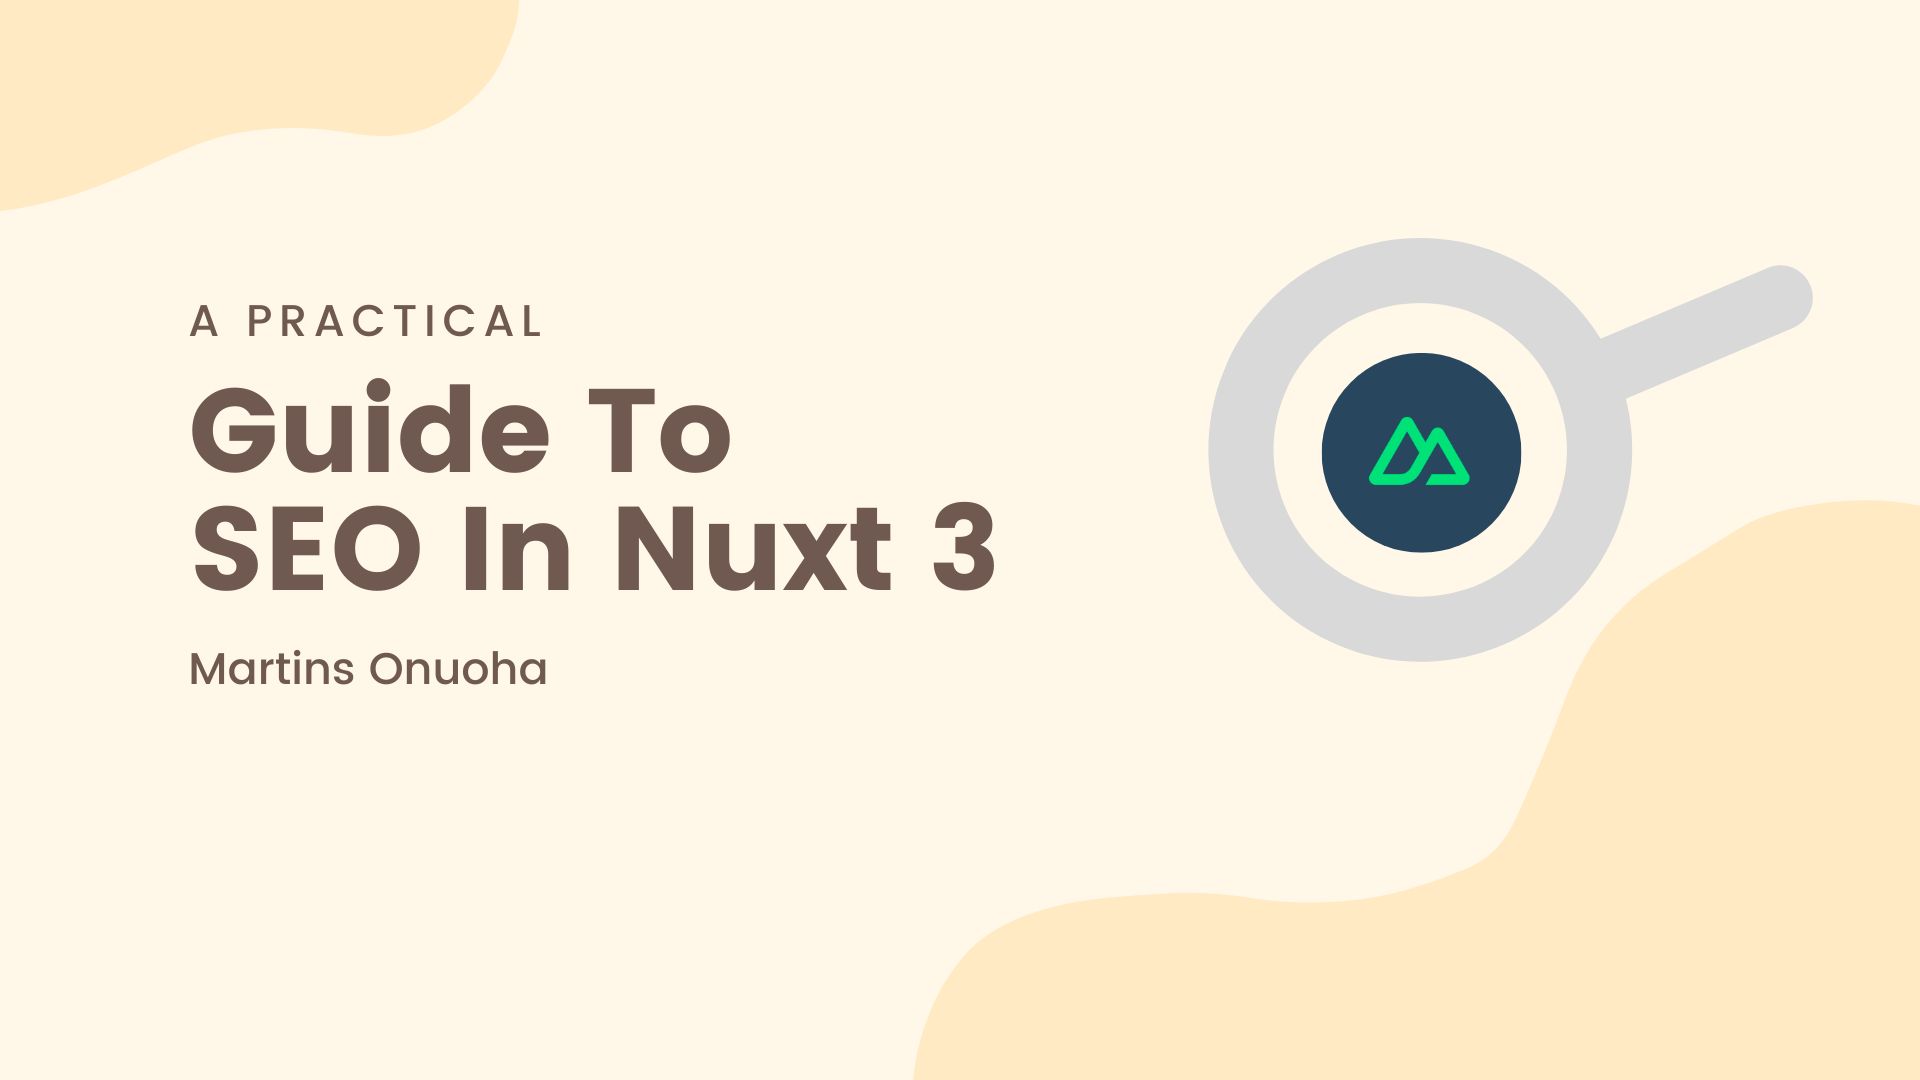 A Practical Guide To SEO In Nuxt 3